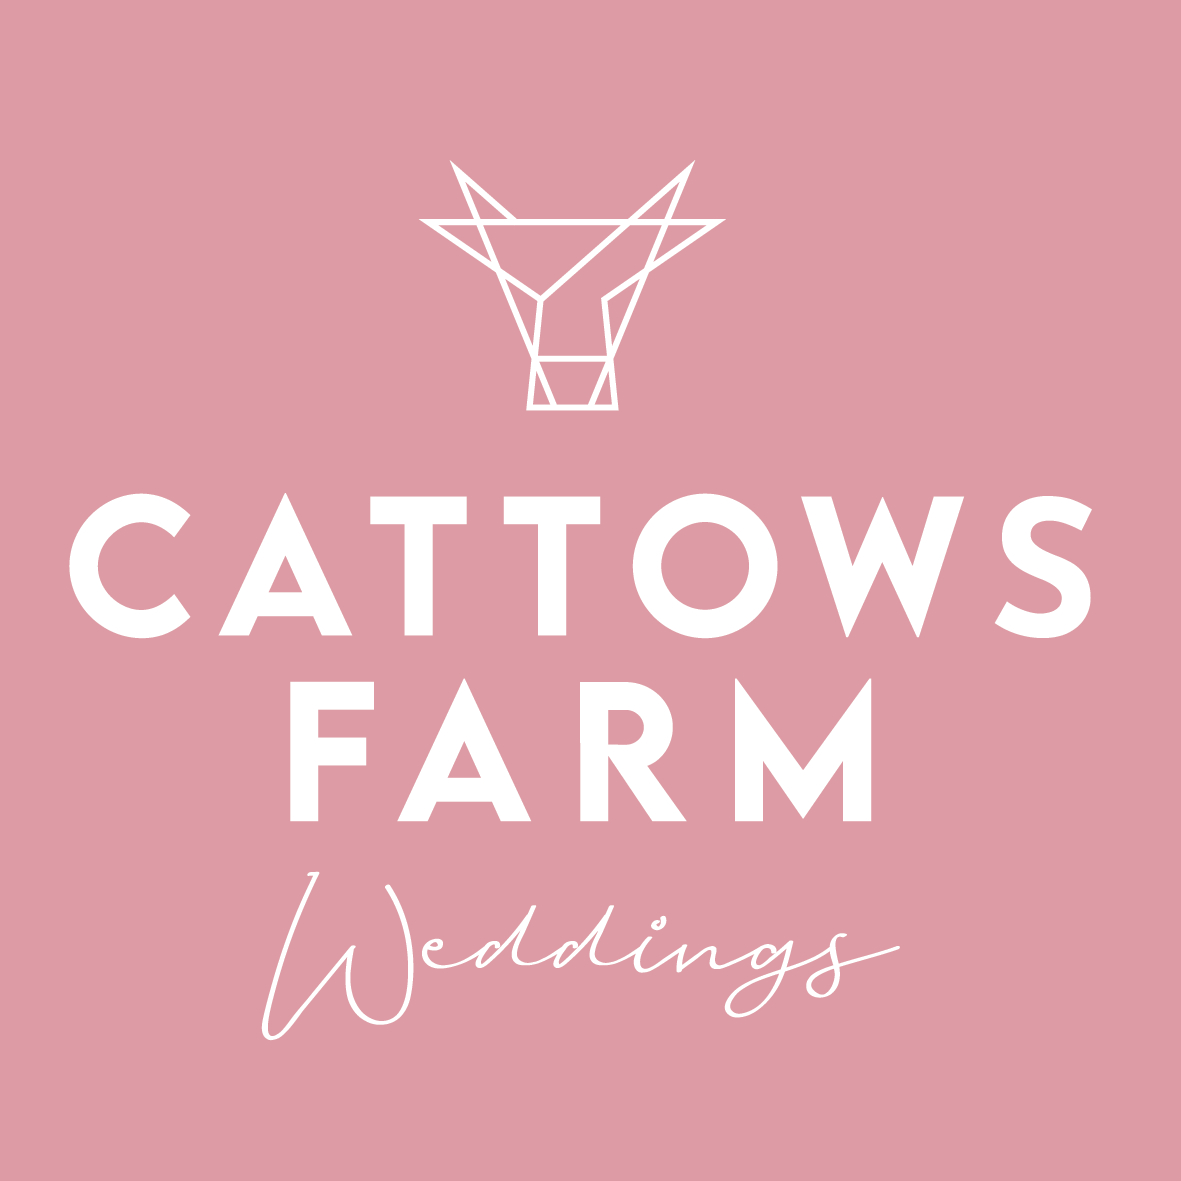 Cattows Farm Weddings, Leicestershire